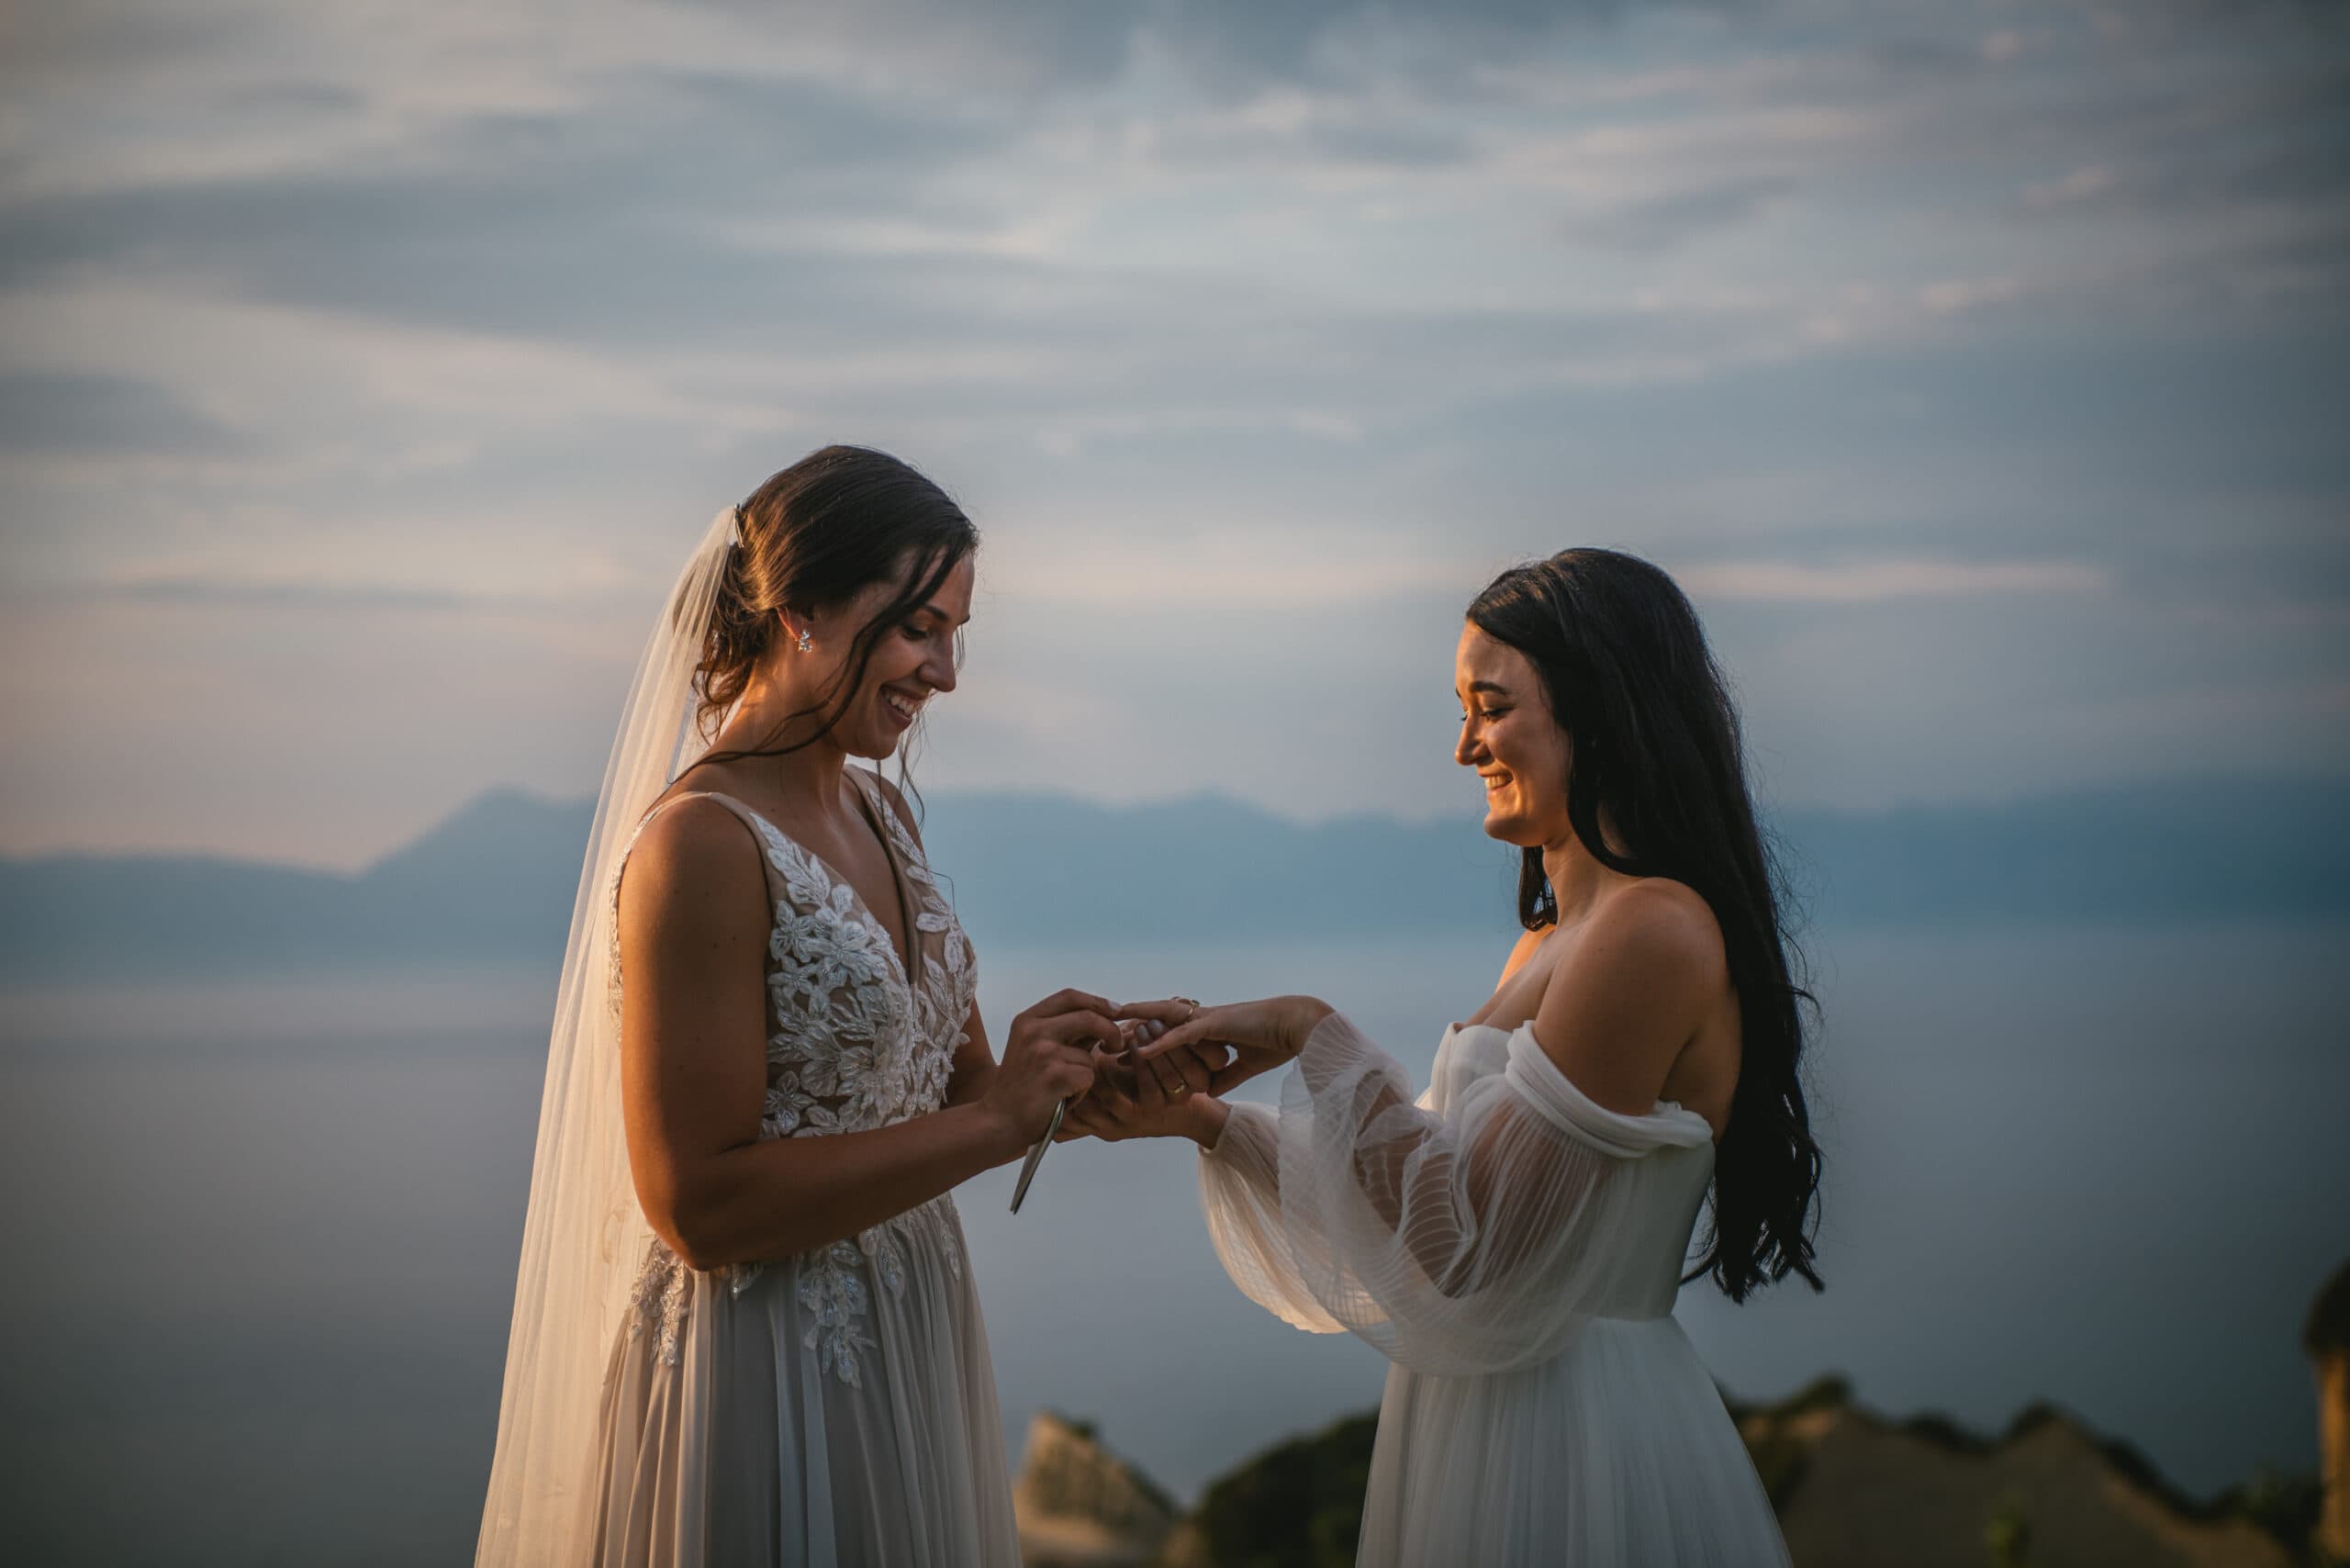 Rings exchanged as promises are made during the Corfu elopement ceremony.